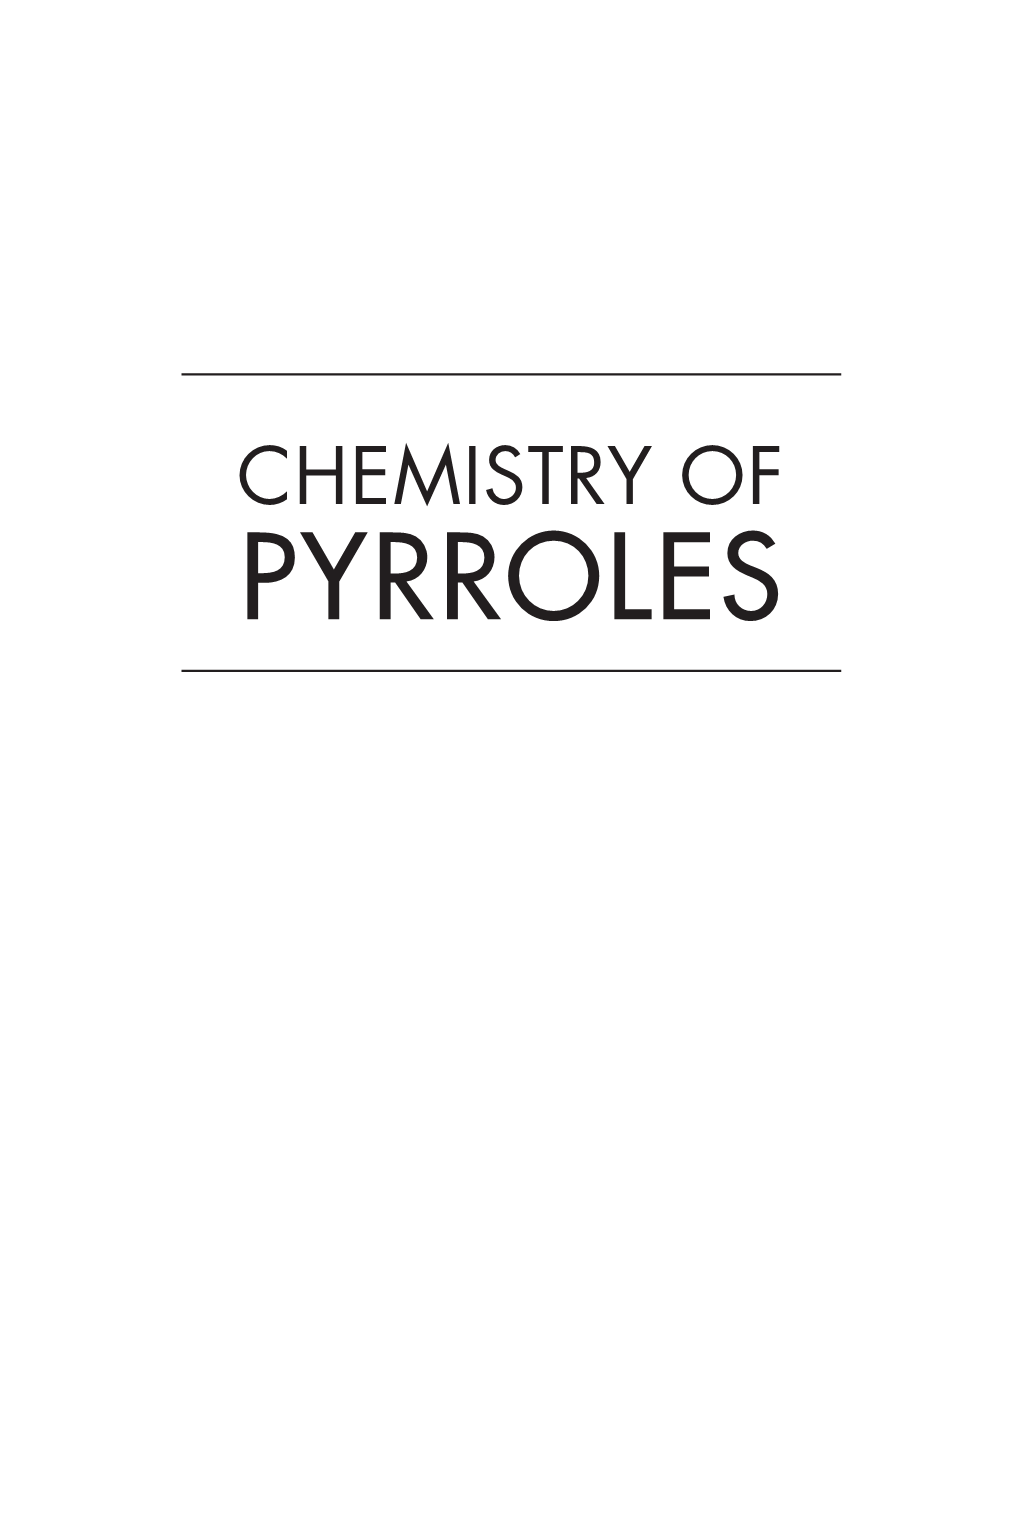 Chemistry of Pyrroles